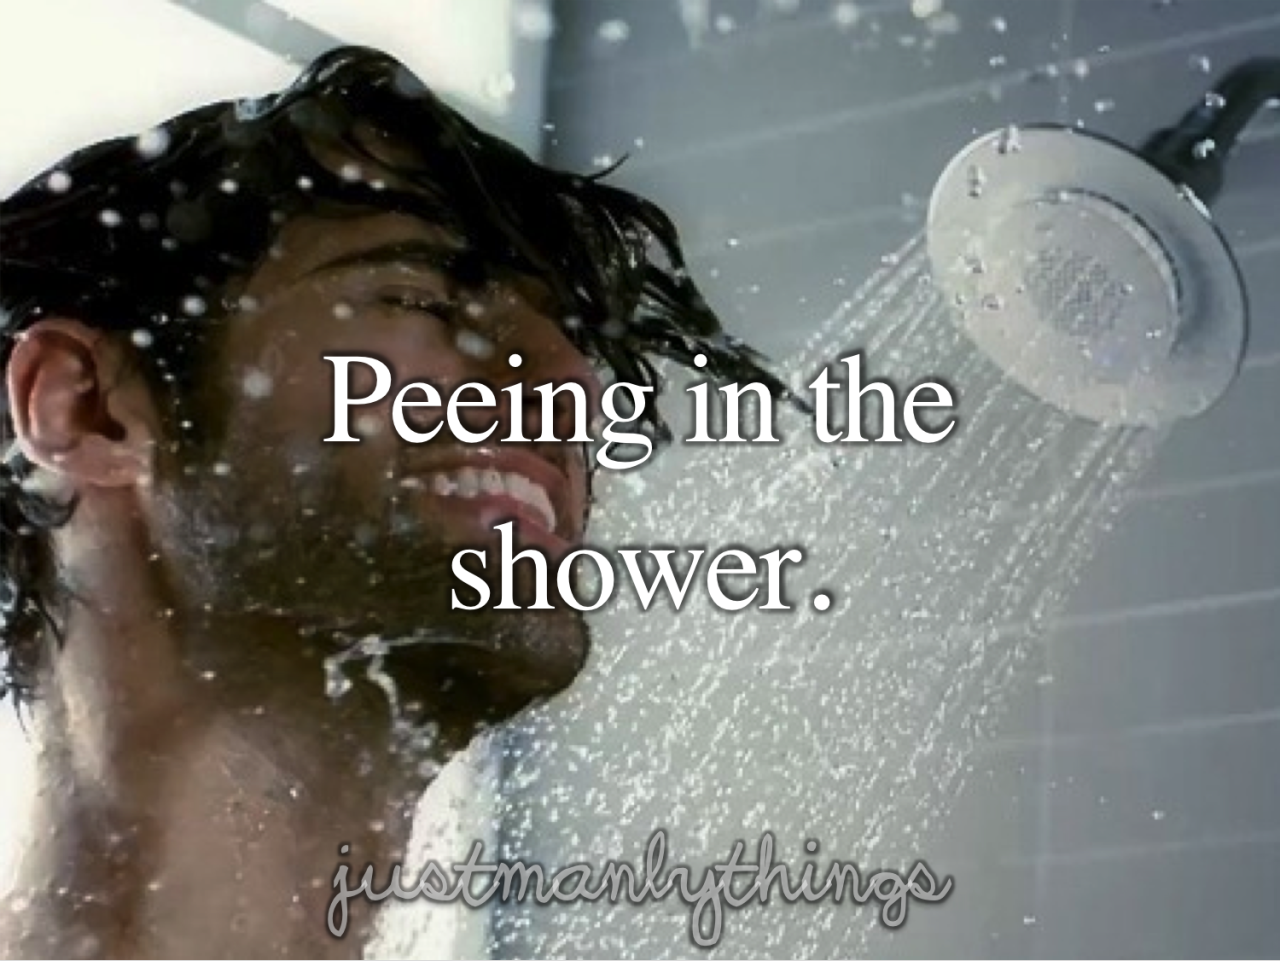 just manly things parody - Peeing in the shower. justinaneweringe